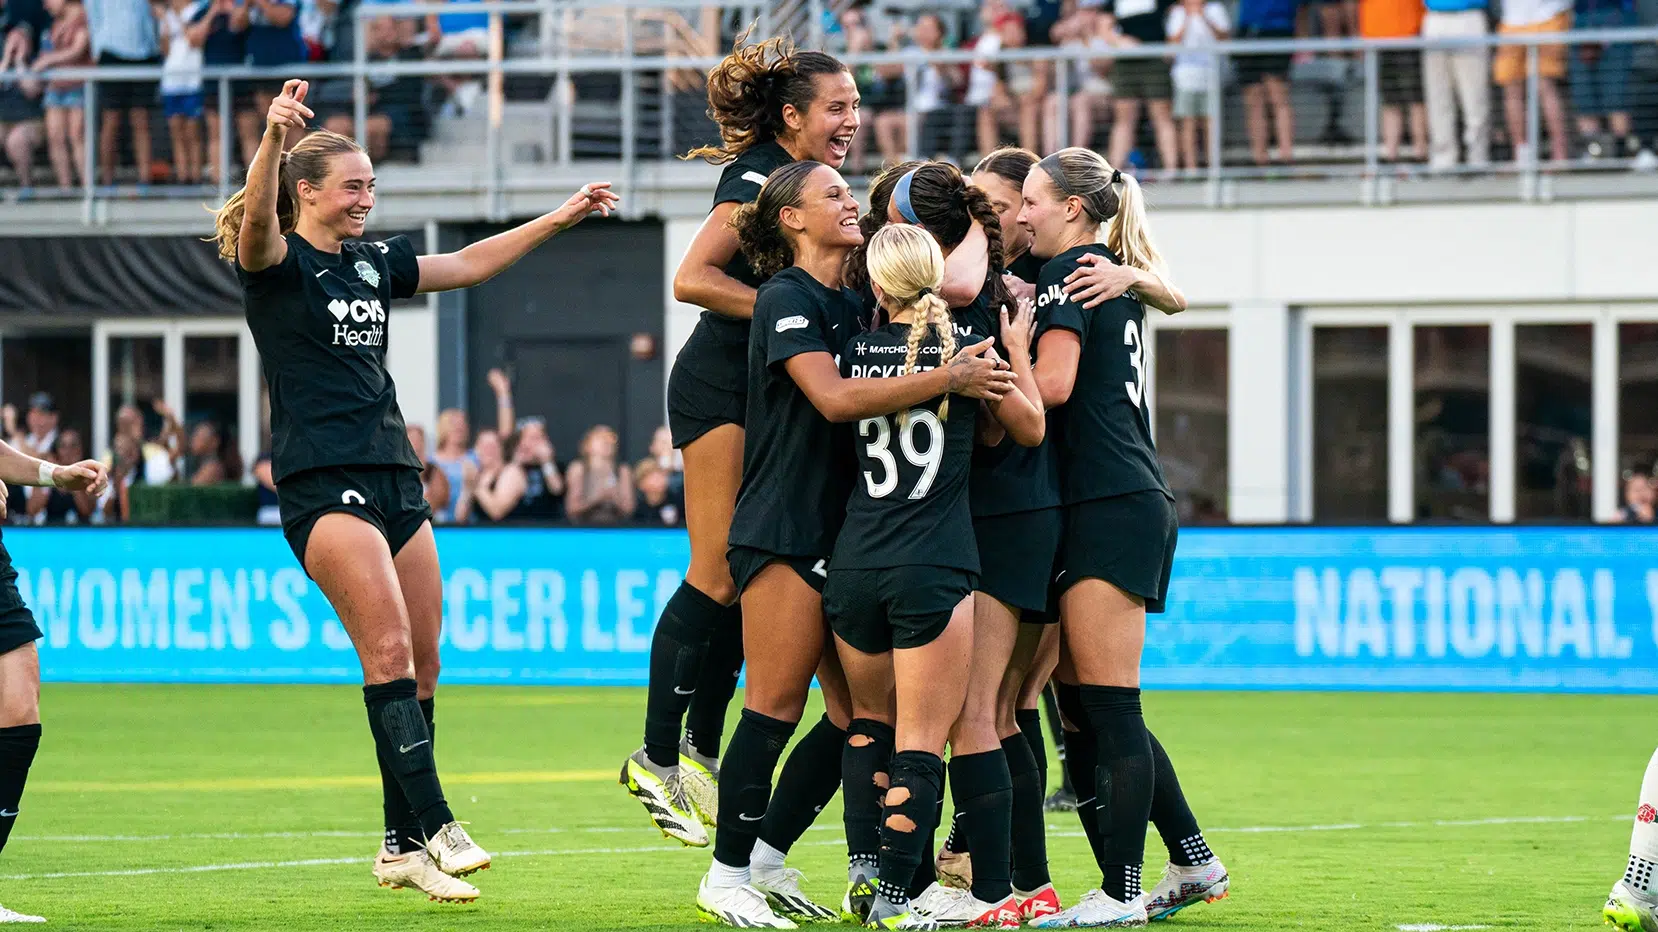 A group of Spirit players in black uniform hug and jump in celebration.